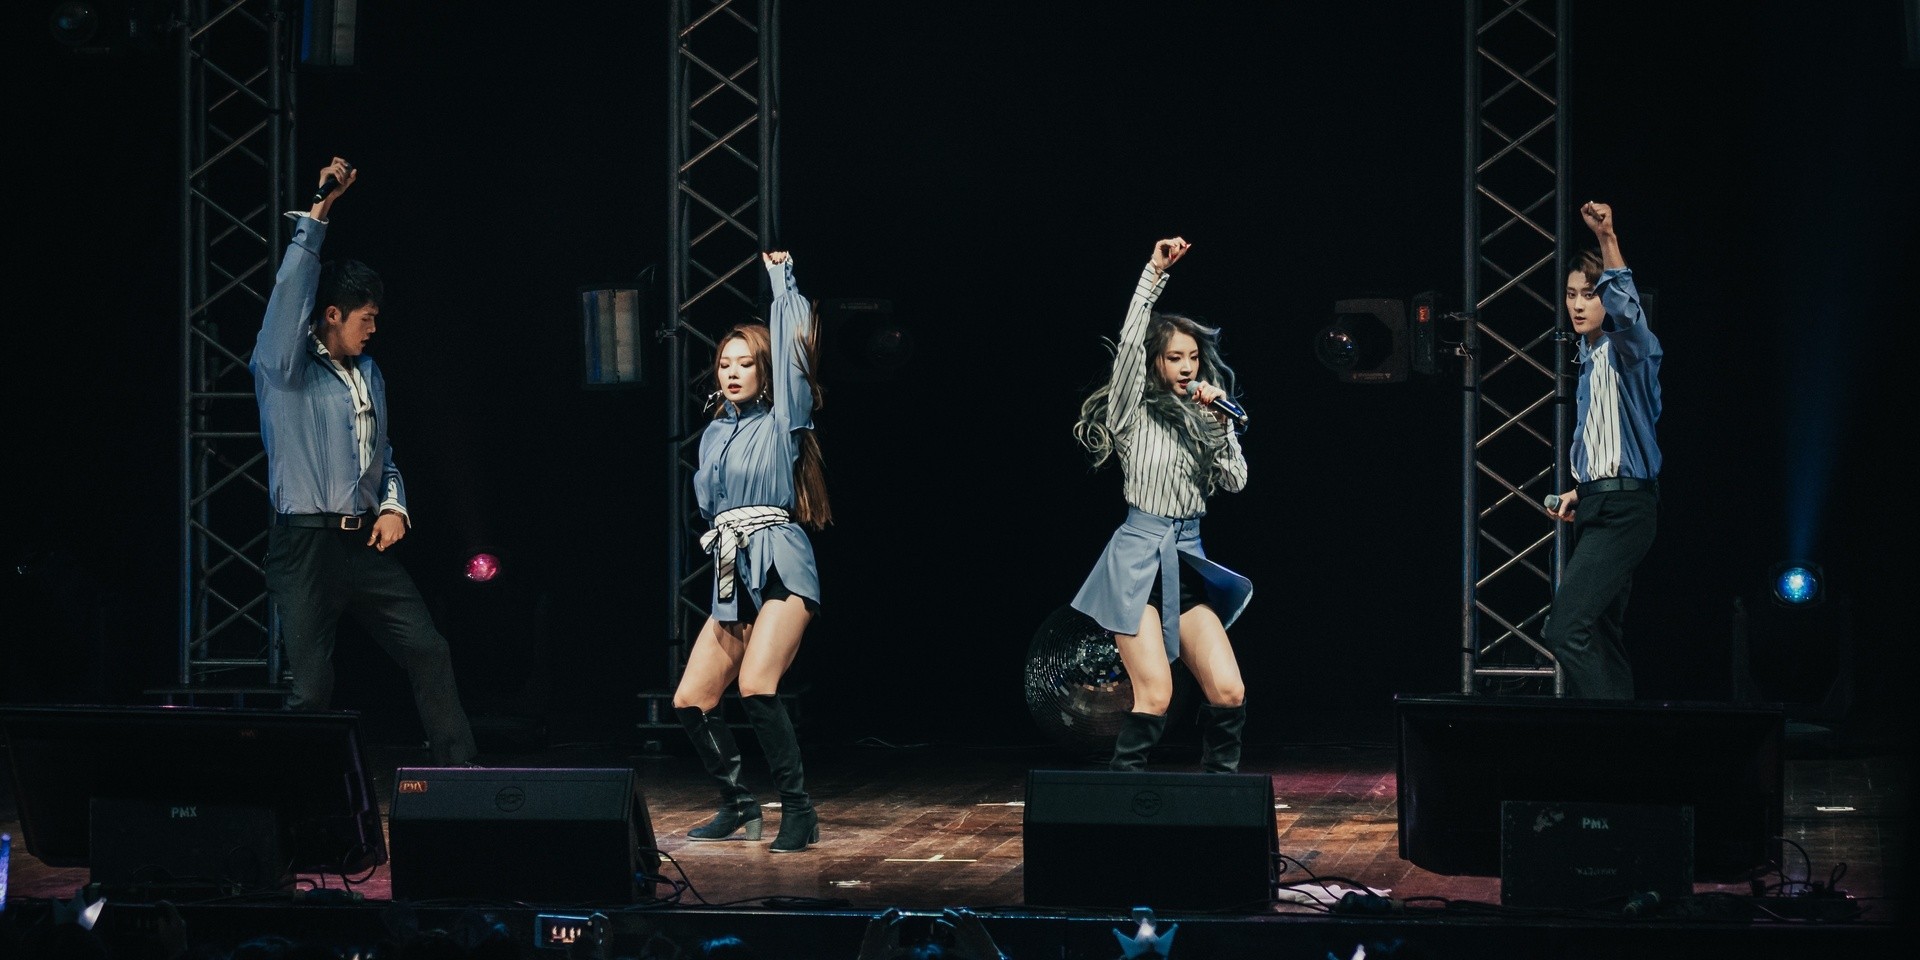 KARD turns up the heat in Manila with a heartwarming last leg of their Asia tour – gig report